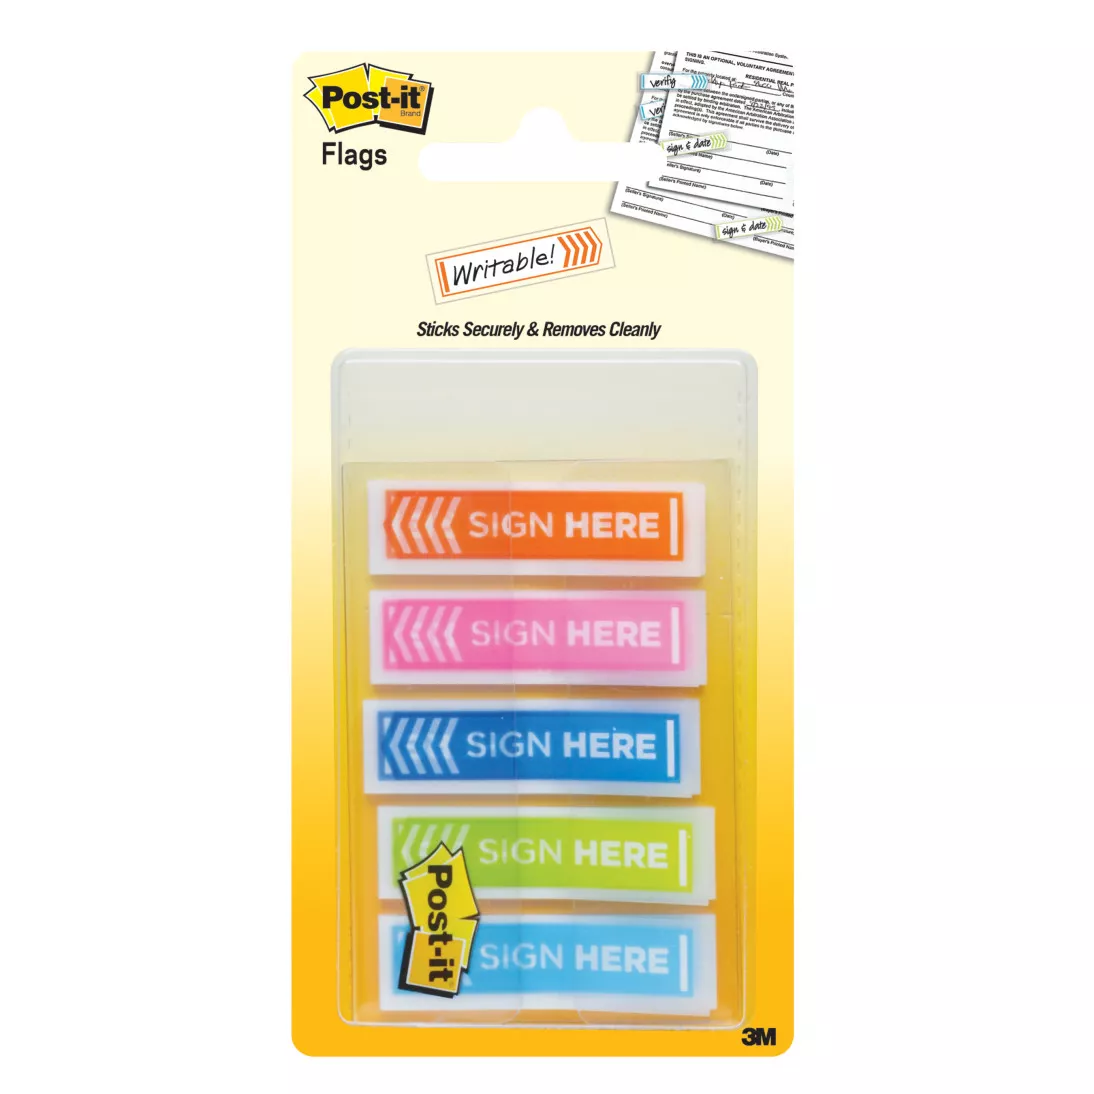 Post-it® Printed Flags 684-SH-OPBLA, .47 in x 1.7 in (11.9 mm x 43.2 mm)